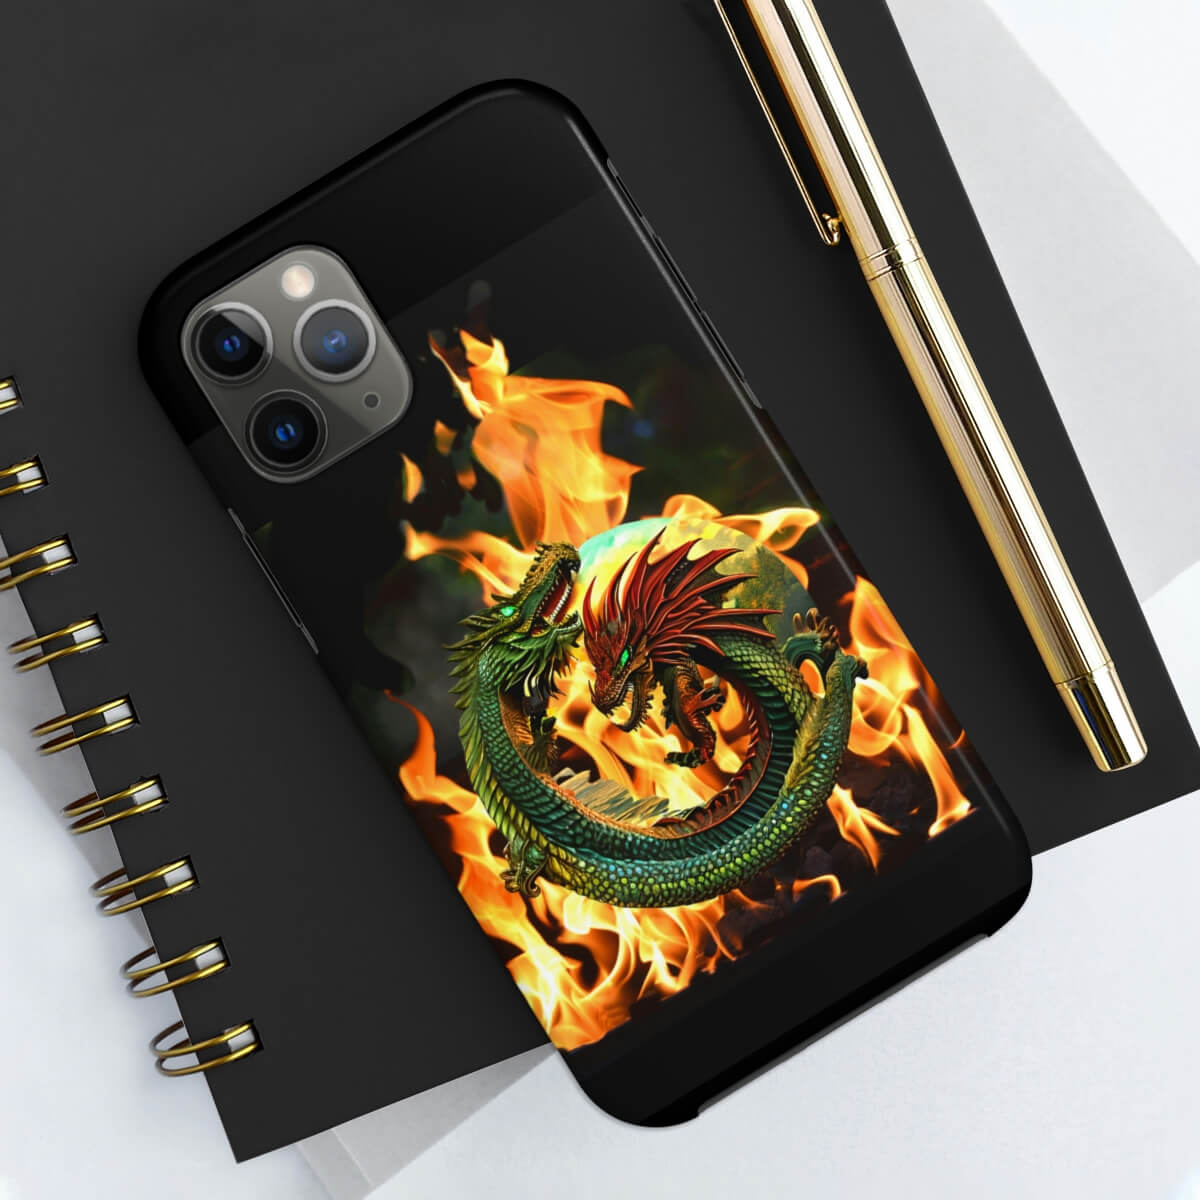 Dragons blaze graphic cell phone protective case